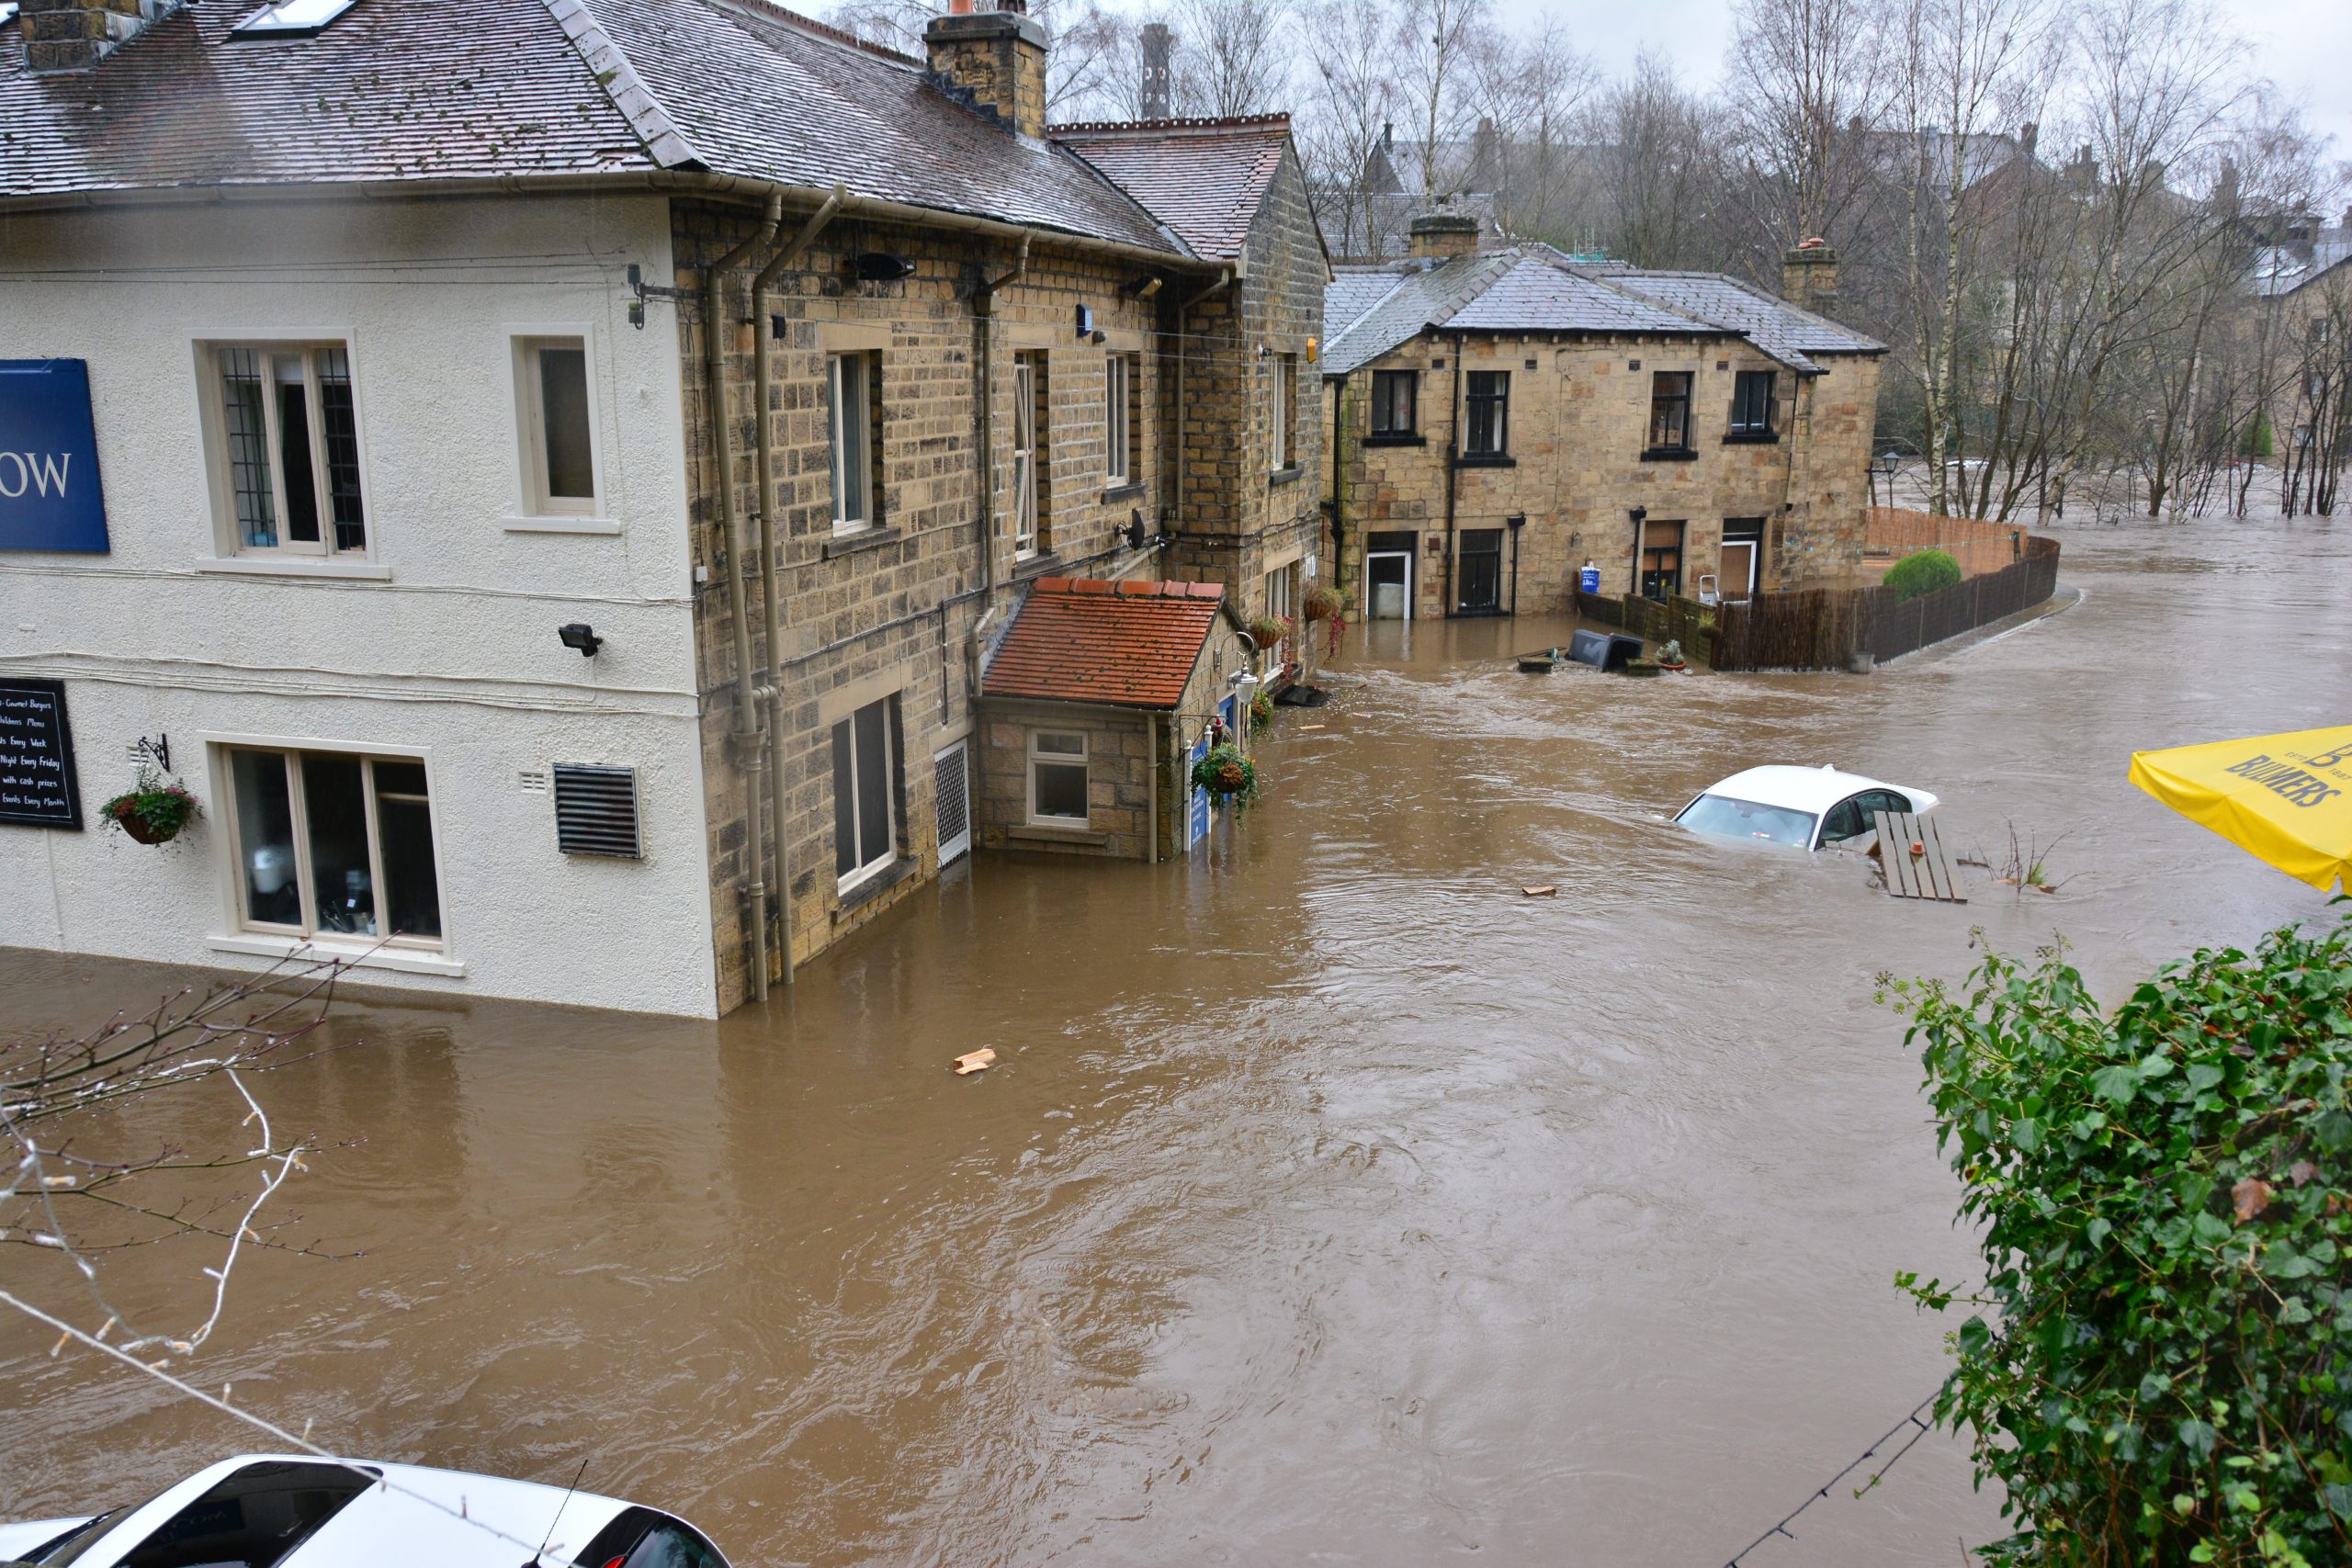 A wideshot shows rural houses in England flooded